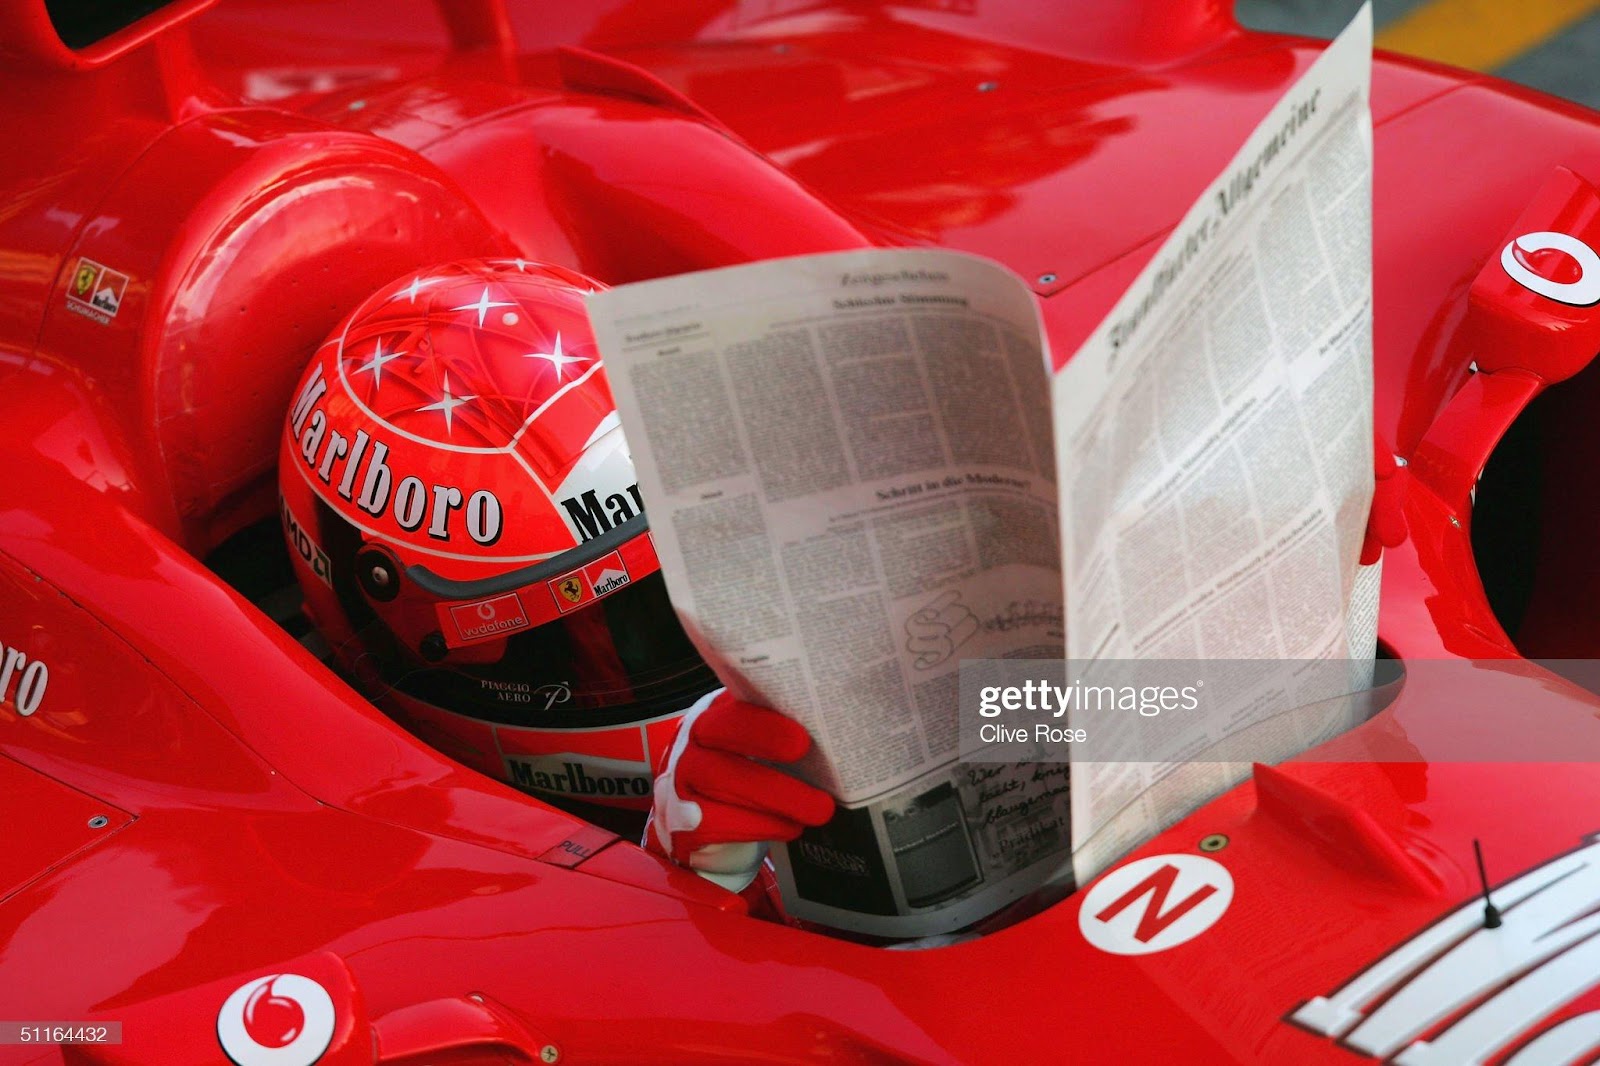 Michael Schumacher, Ferrari, poses with a newspaper in the pits prior to the practice session for the Hungarian F1 Grand Prix at the Hungaroring Circuit on August 13, 2004, in Budapest, Hungary.